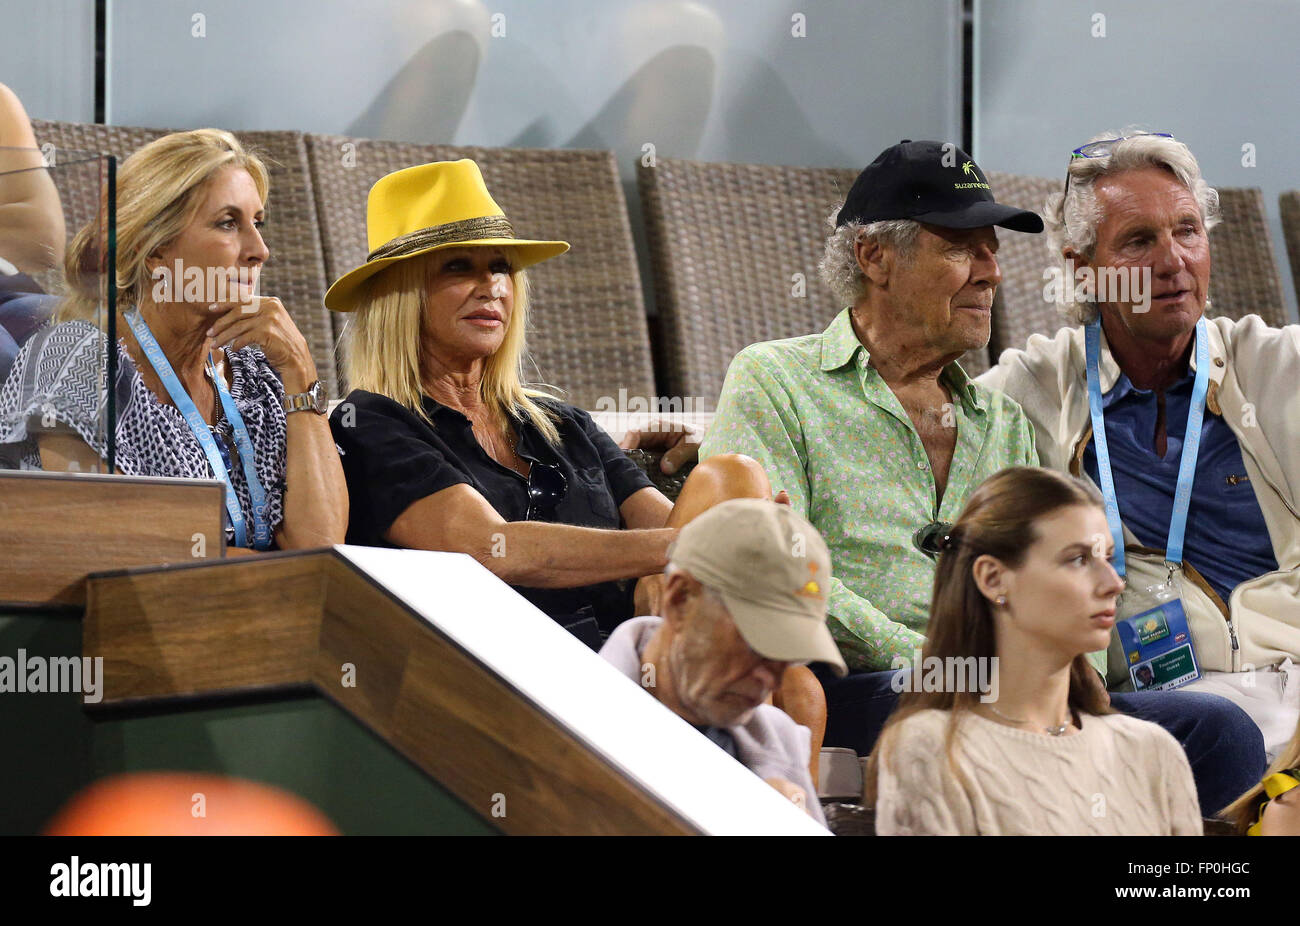 Indian Wells, California, USA. 15th Mar, 2016. Suzanne Somers watches Novak Djokovic of Serbia play Philipp Kohlschreiber of Germany during the 2016 BNP Paribas Open at Indian Wells Tennis Garden in Indian Wells, California. Charles Baus/CSM/Alamy Live News Stock Photo